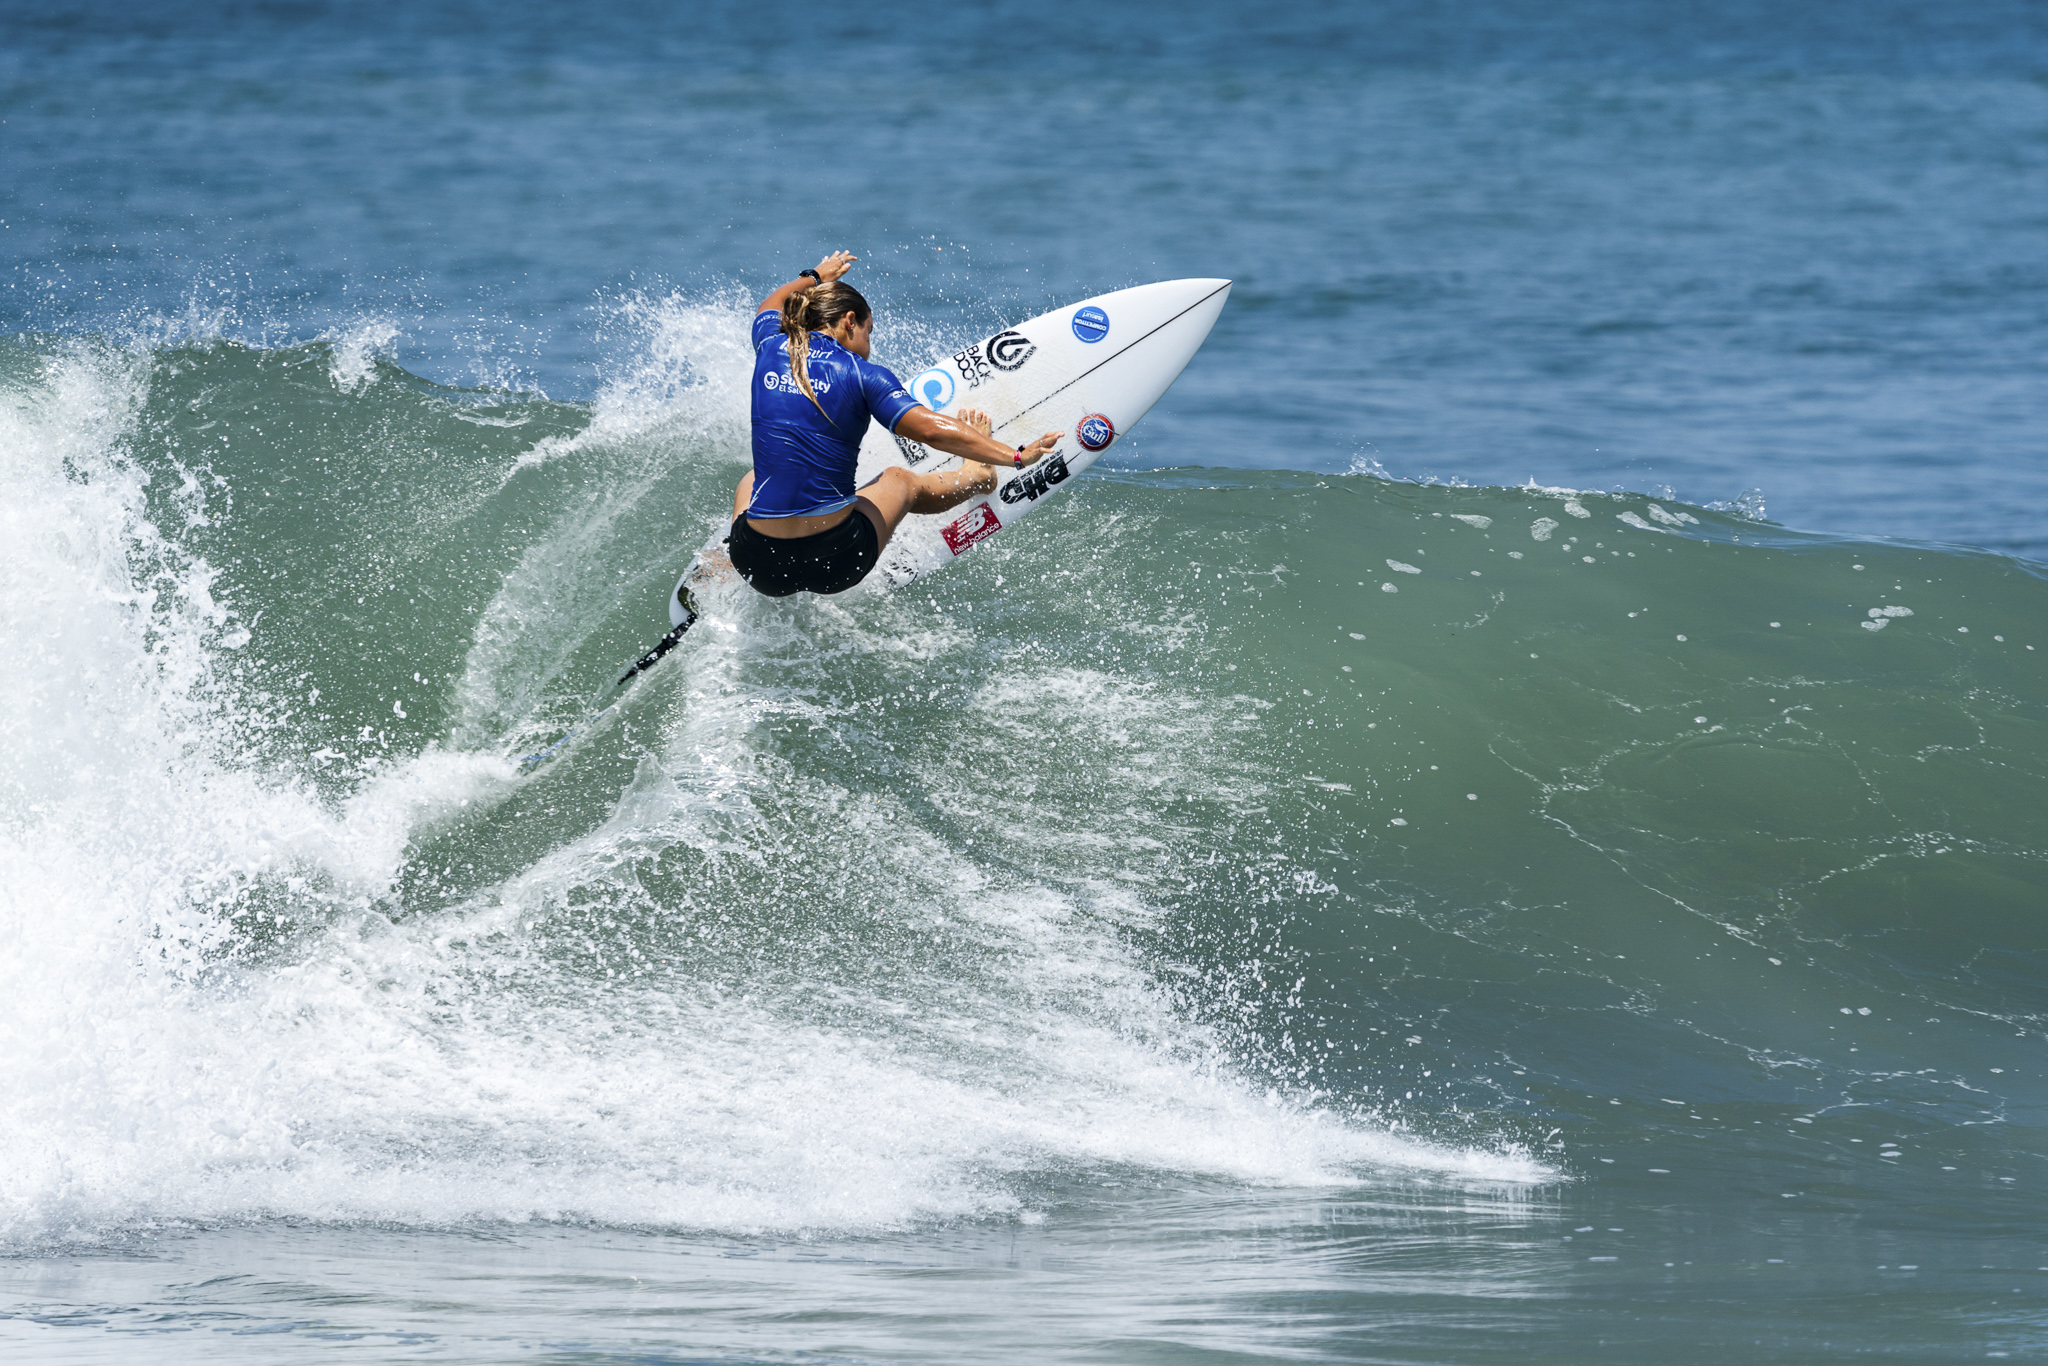 Paige Xxx - Paige Hareb Narrowly Misses Olympic Qualification - New Zealand Surf Journal